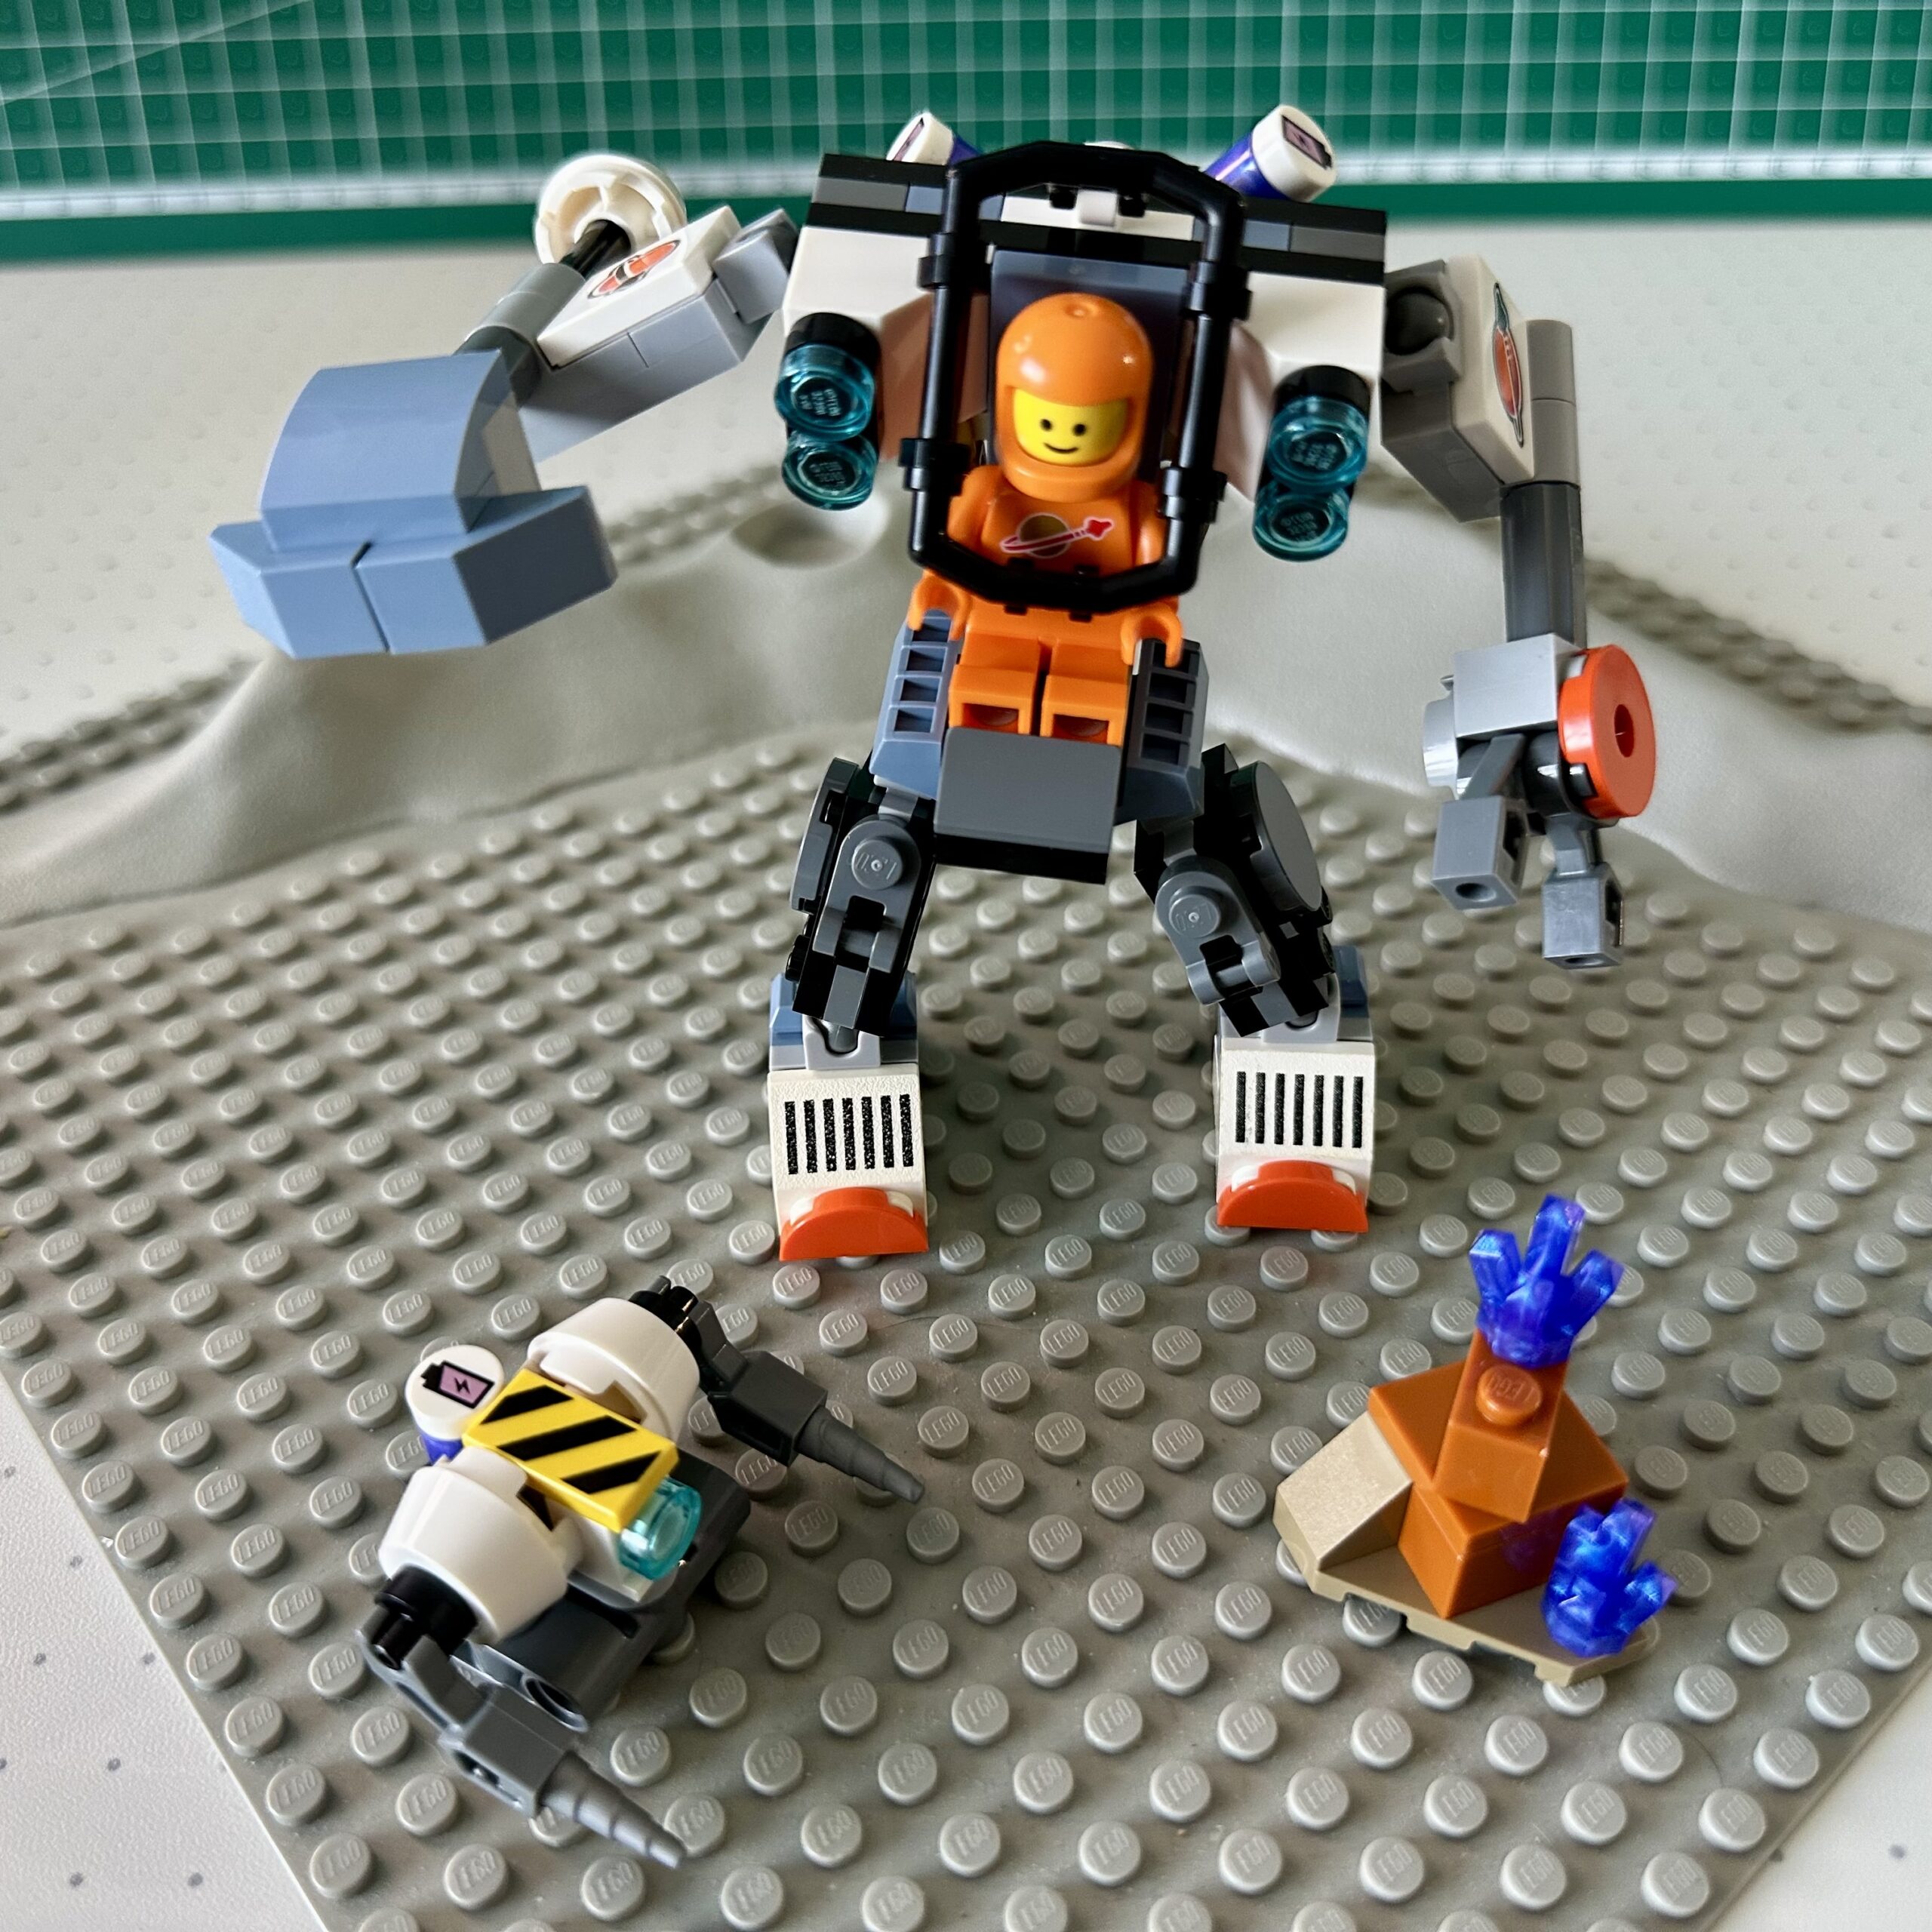 An orange LEGO classic spaceman drives the mech from the 2024 Space Construction Mech set. Posed on a classic gray crater baseplate from the 1970's. Some of the stickered parts have been replace with old printed elements from the 1980's.